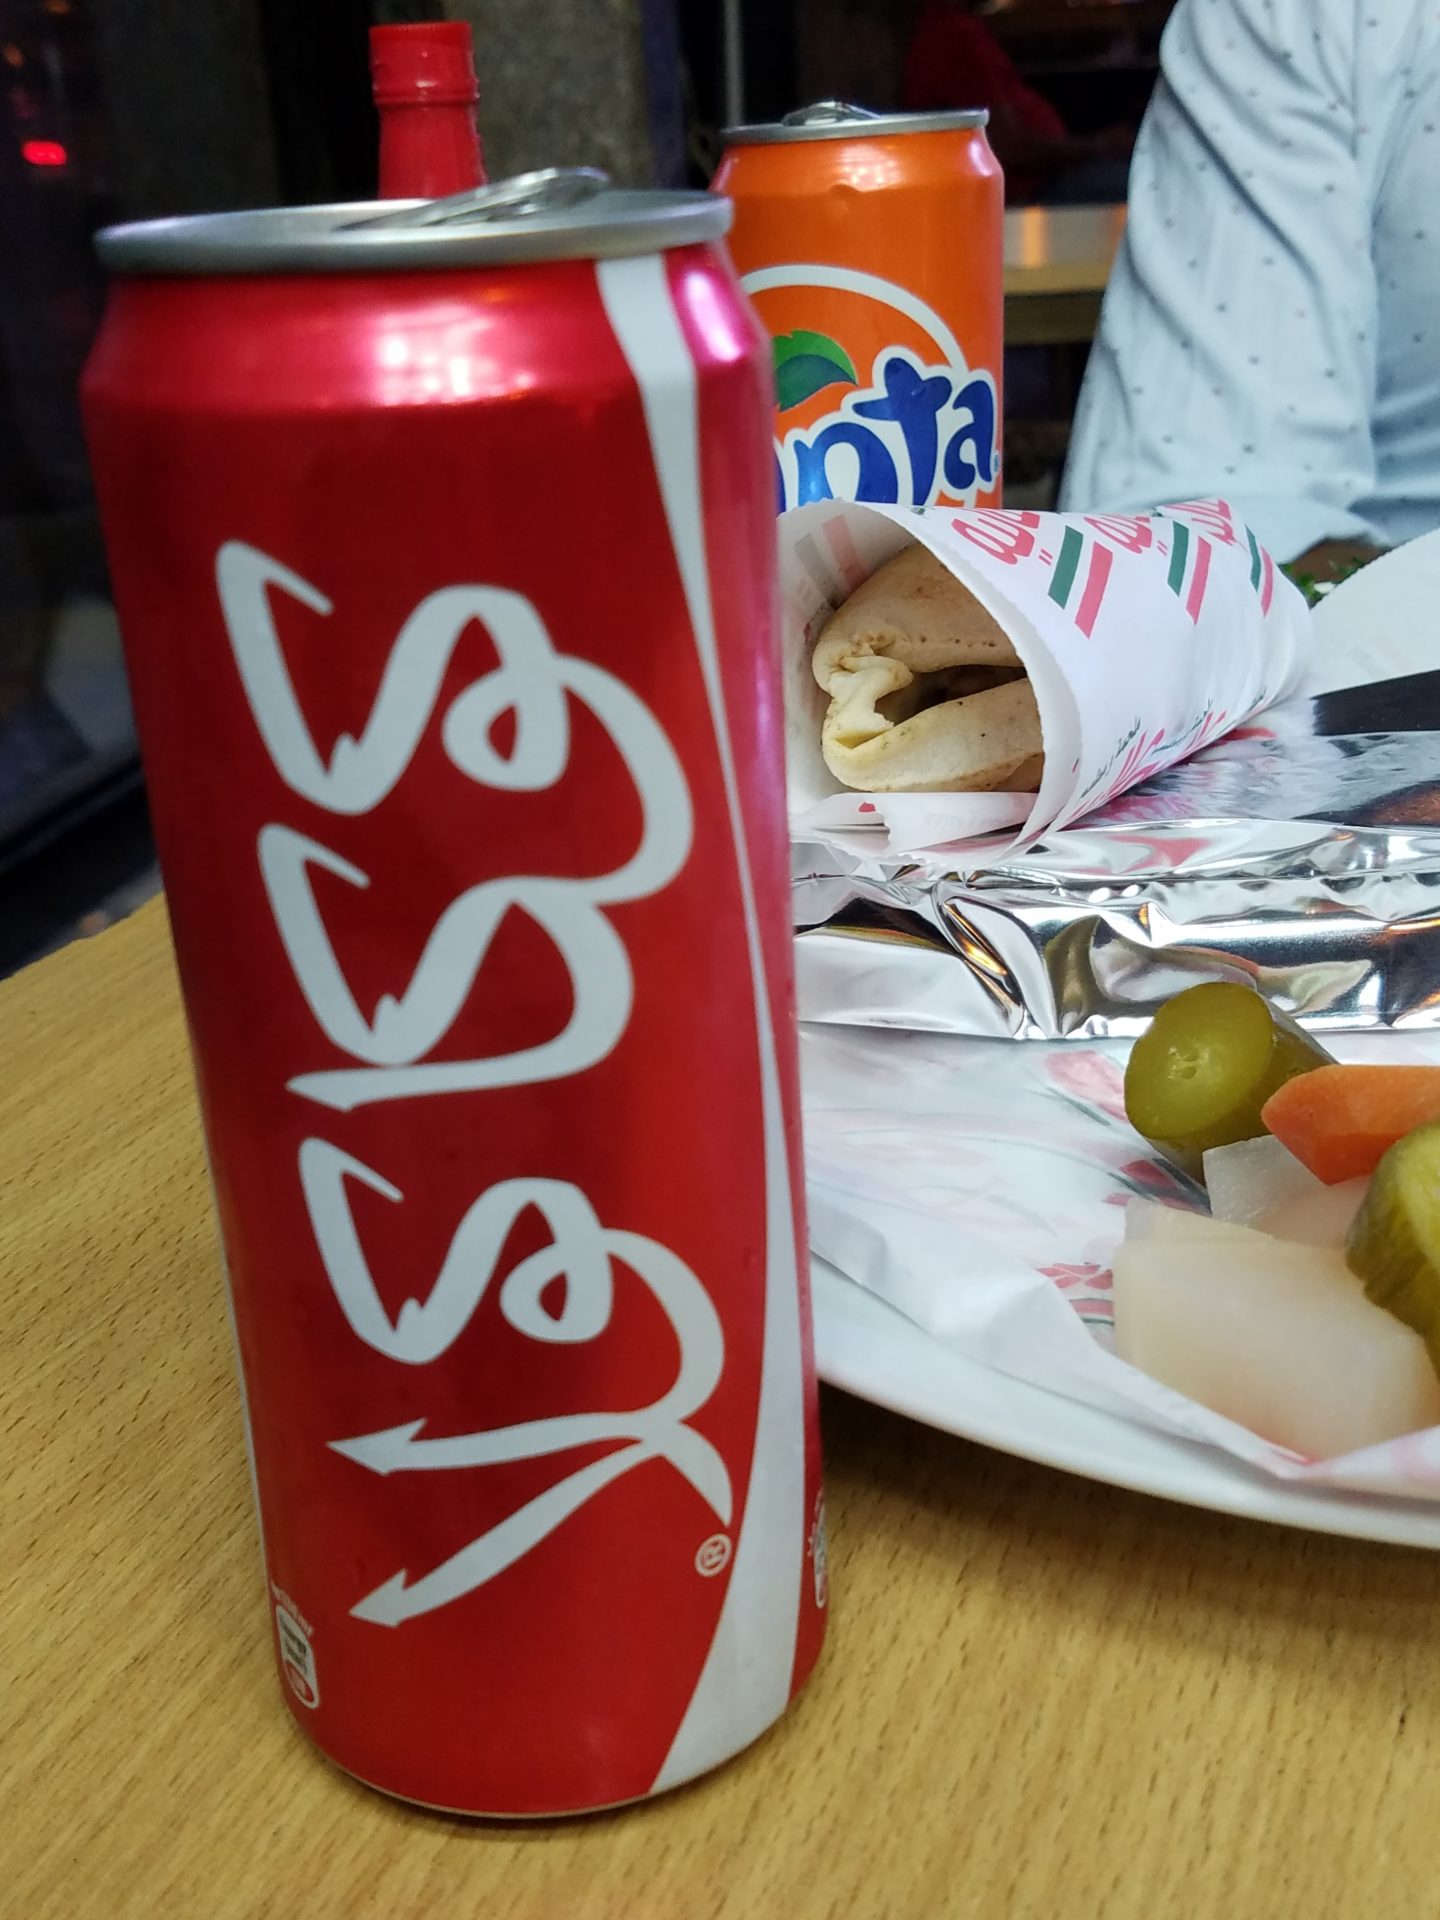 a red can of soda next to a plate of food